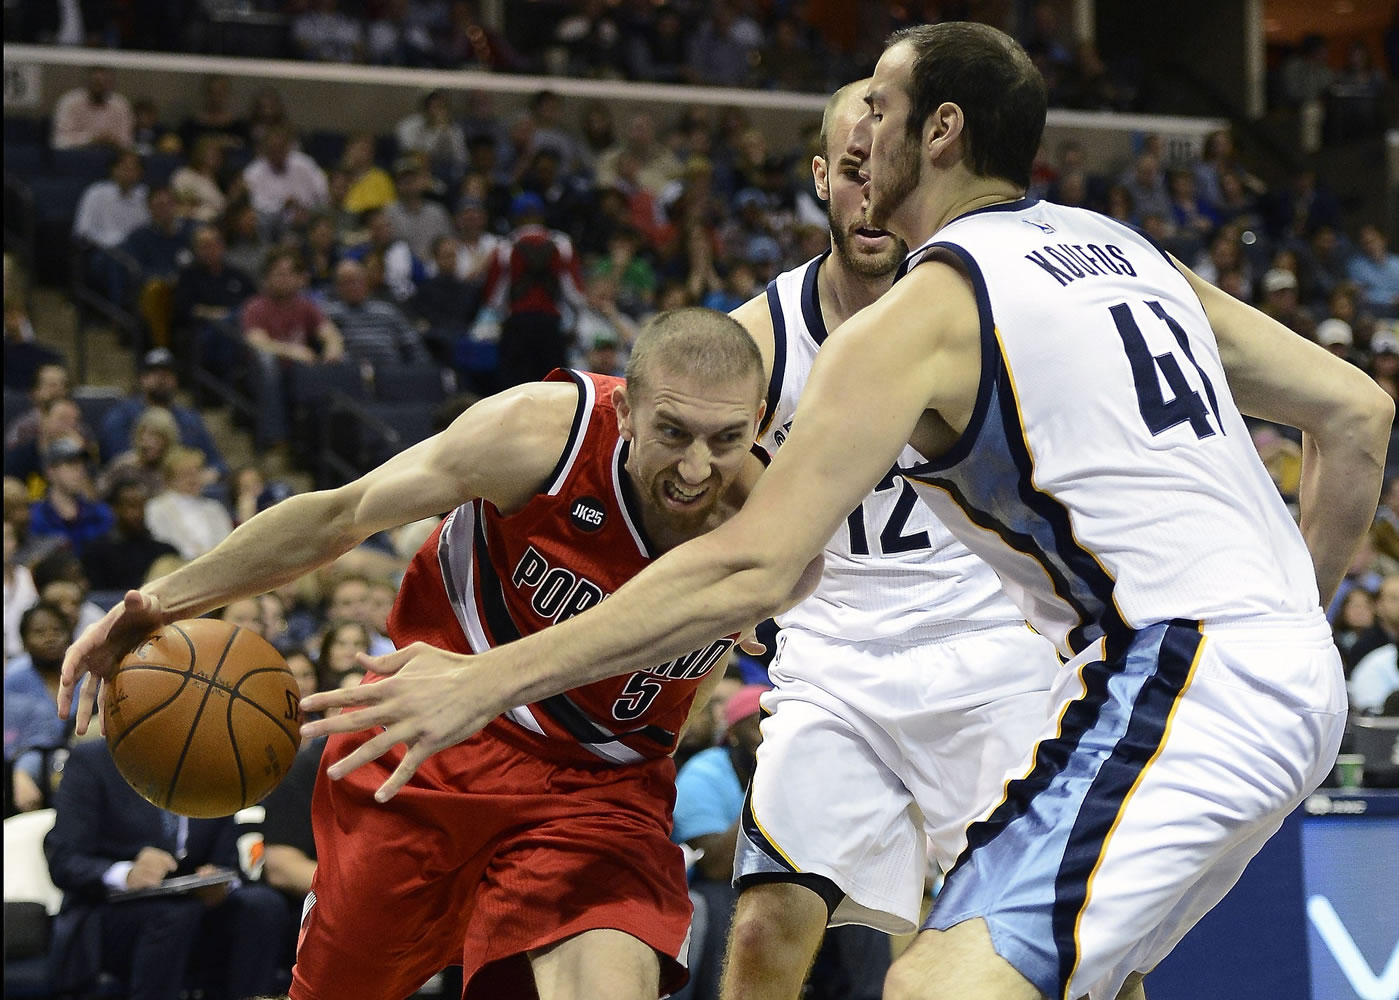 Portland Trail Blazers guard Steve Blake (5) is fouled by going the the basket by Memphis Grizzlies center Kosta Koufos (41) in the first half of an NBA basketball game Saturday, March 21, 2015, in Memphis, Tenn.